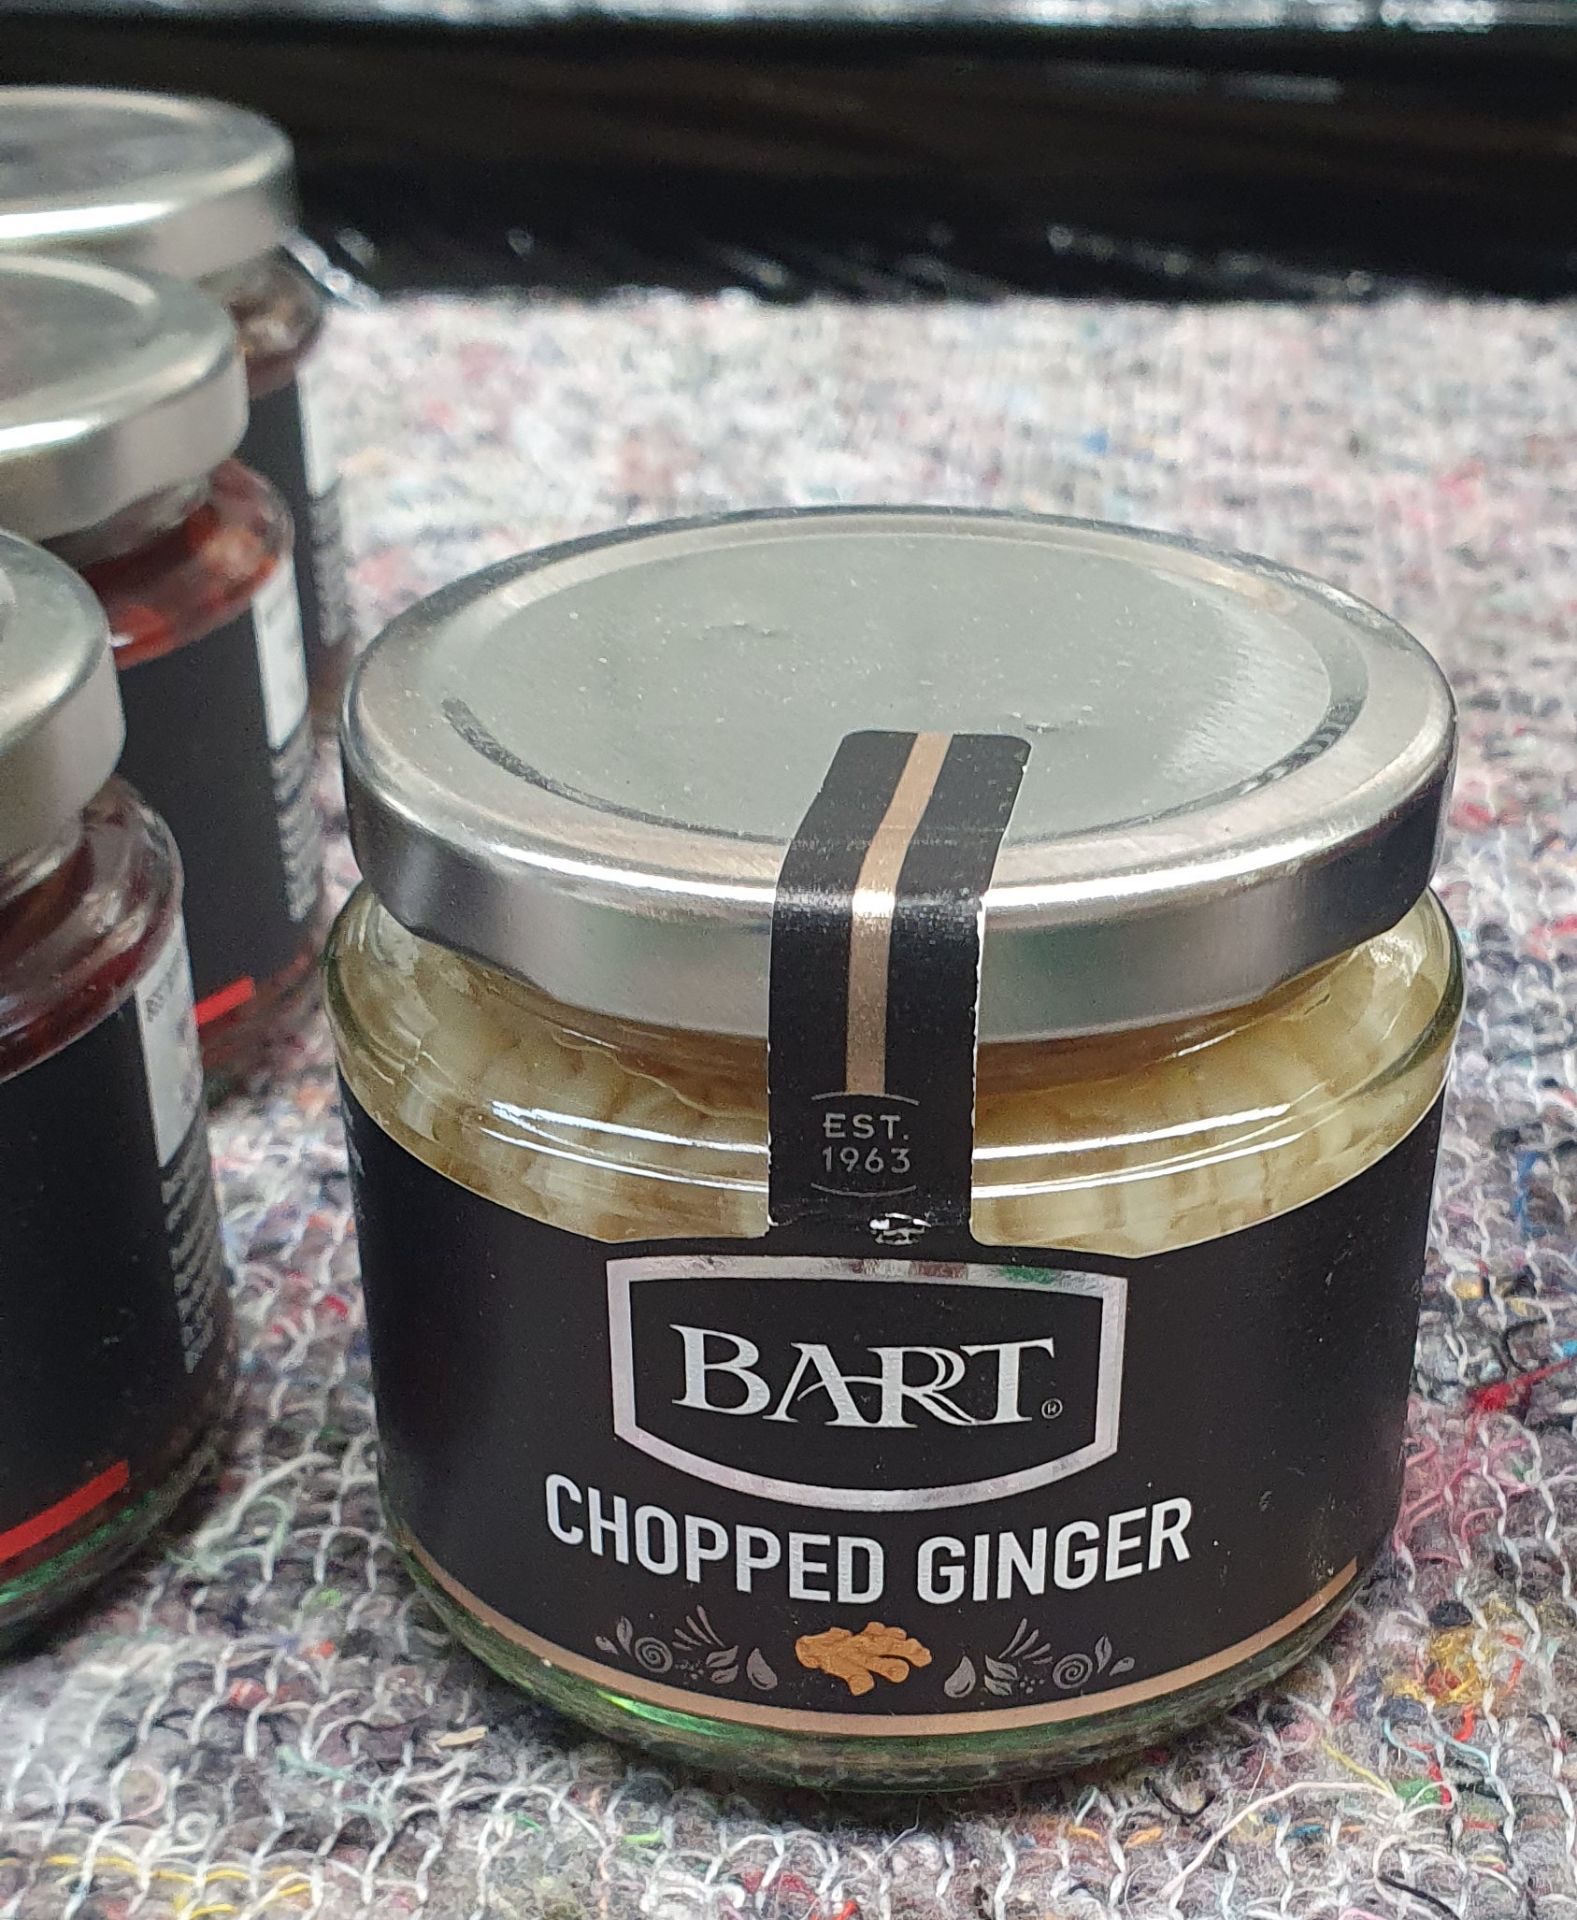 27 x Bart Products Including Garlic, Chilli, Ginger, Salt - Ref: TCH435 - CL840 - Location: - Image 4 of 12